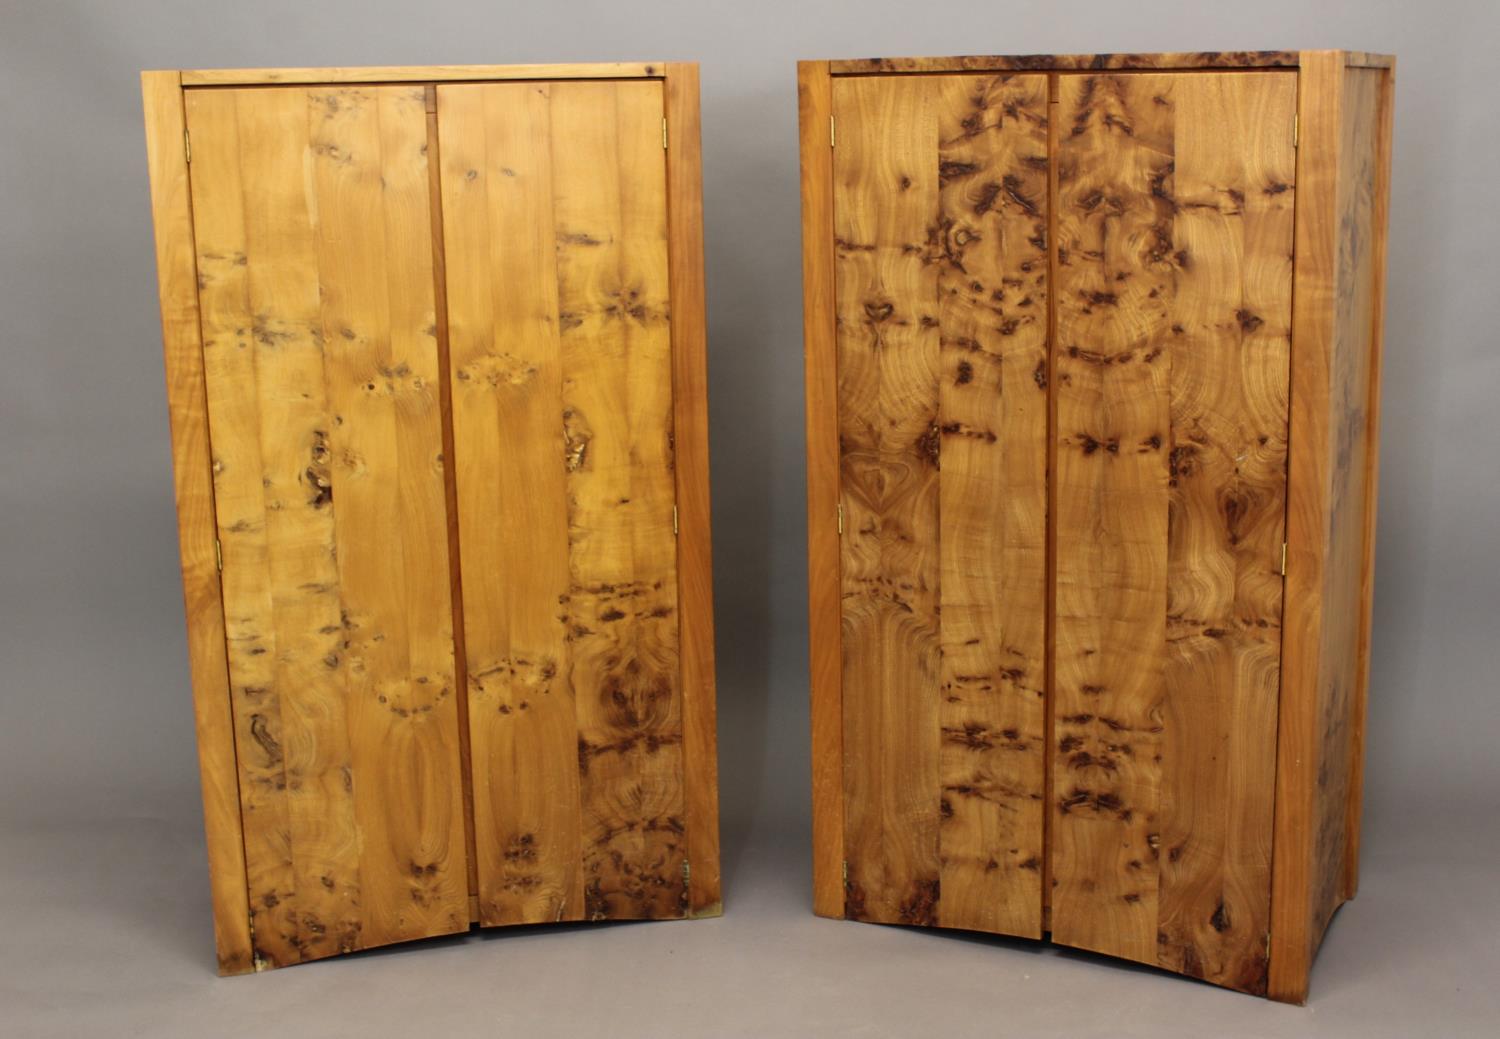 DAVID LINLEY - PAIR OF CUPBOARDS a pair of two door burr elm wooden cupboards, each with